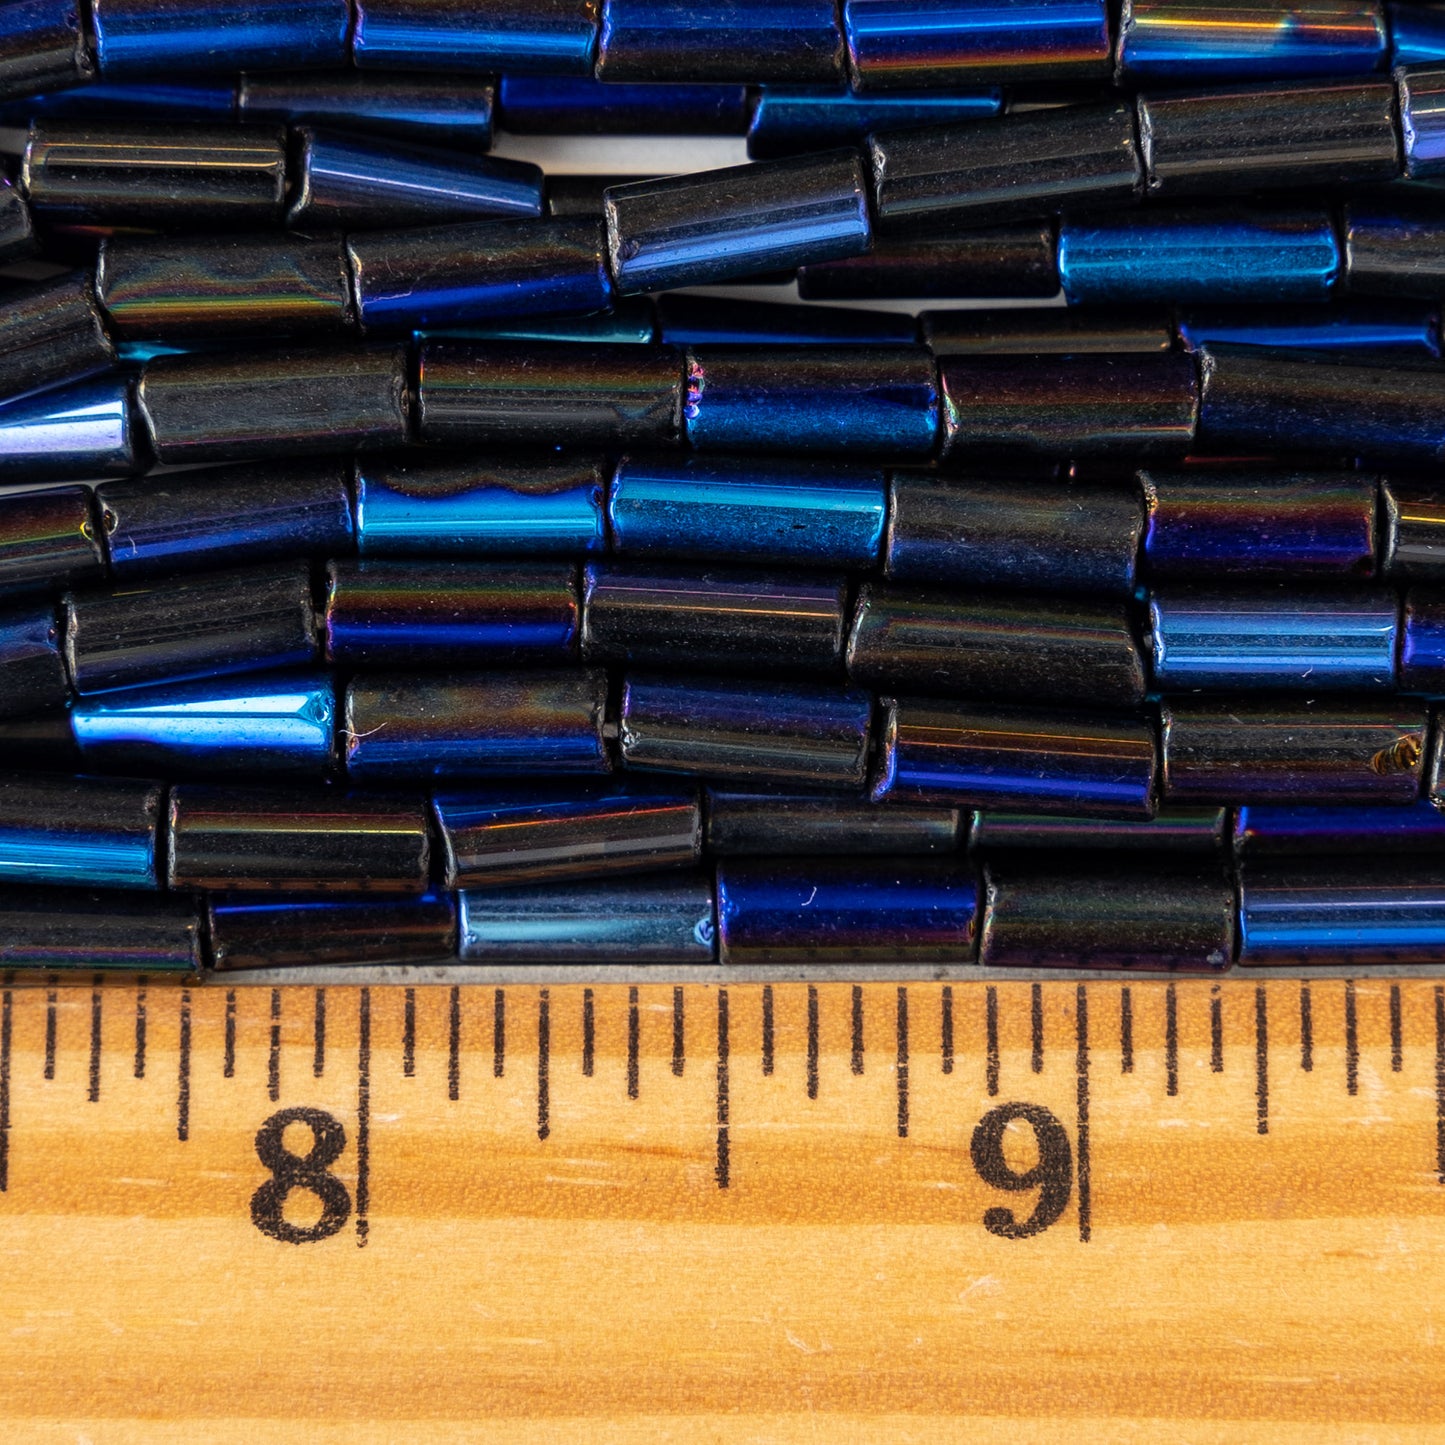 9x4mm Glass Tube Beads - Metallic Scarabee Blue - 20 or 60 Inches